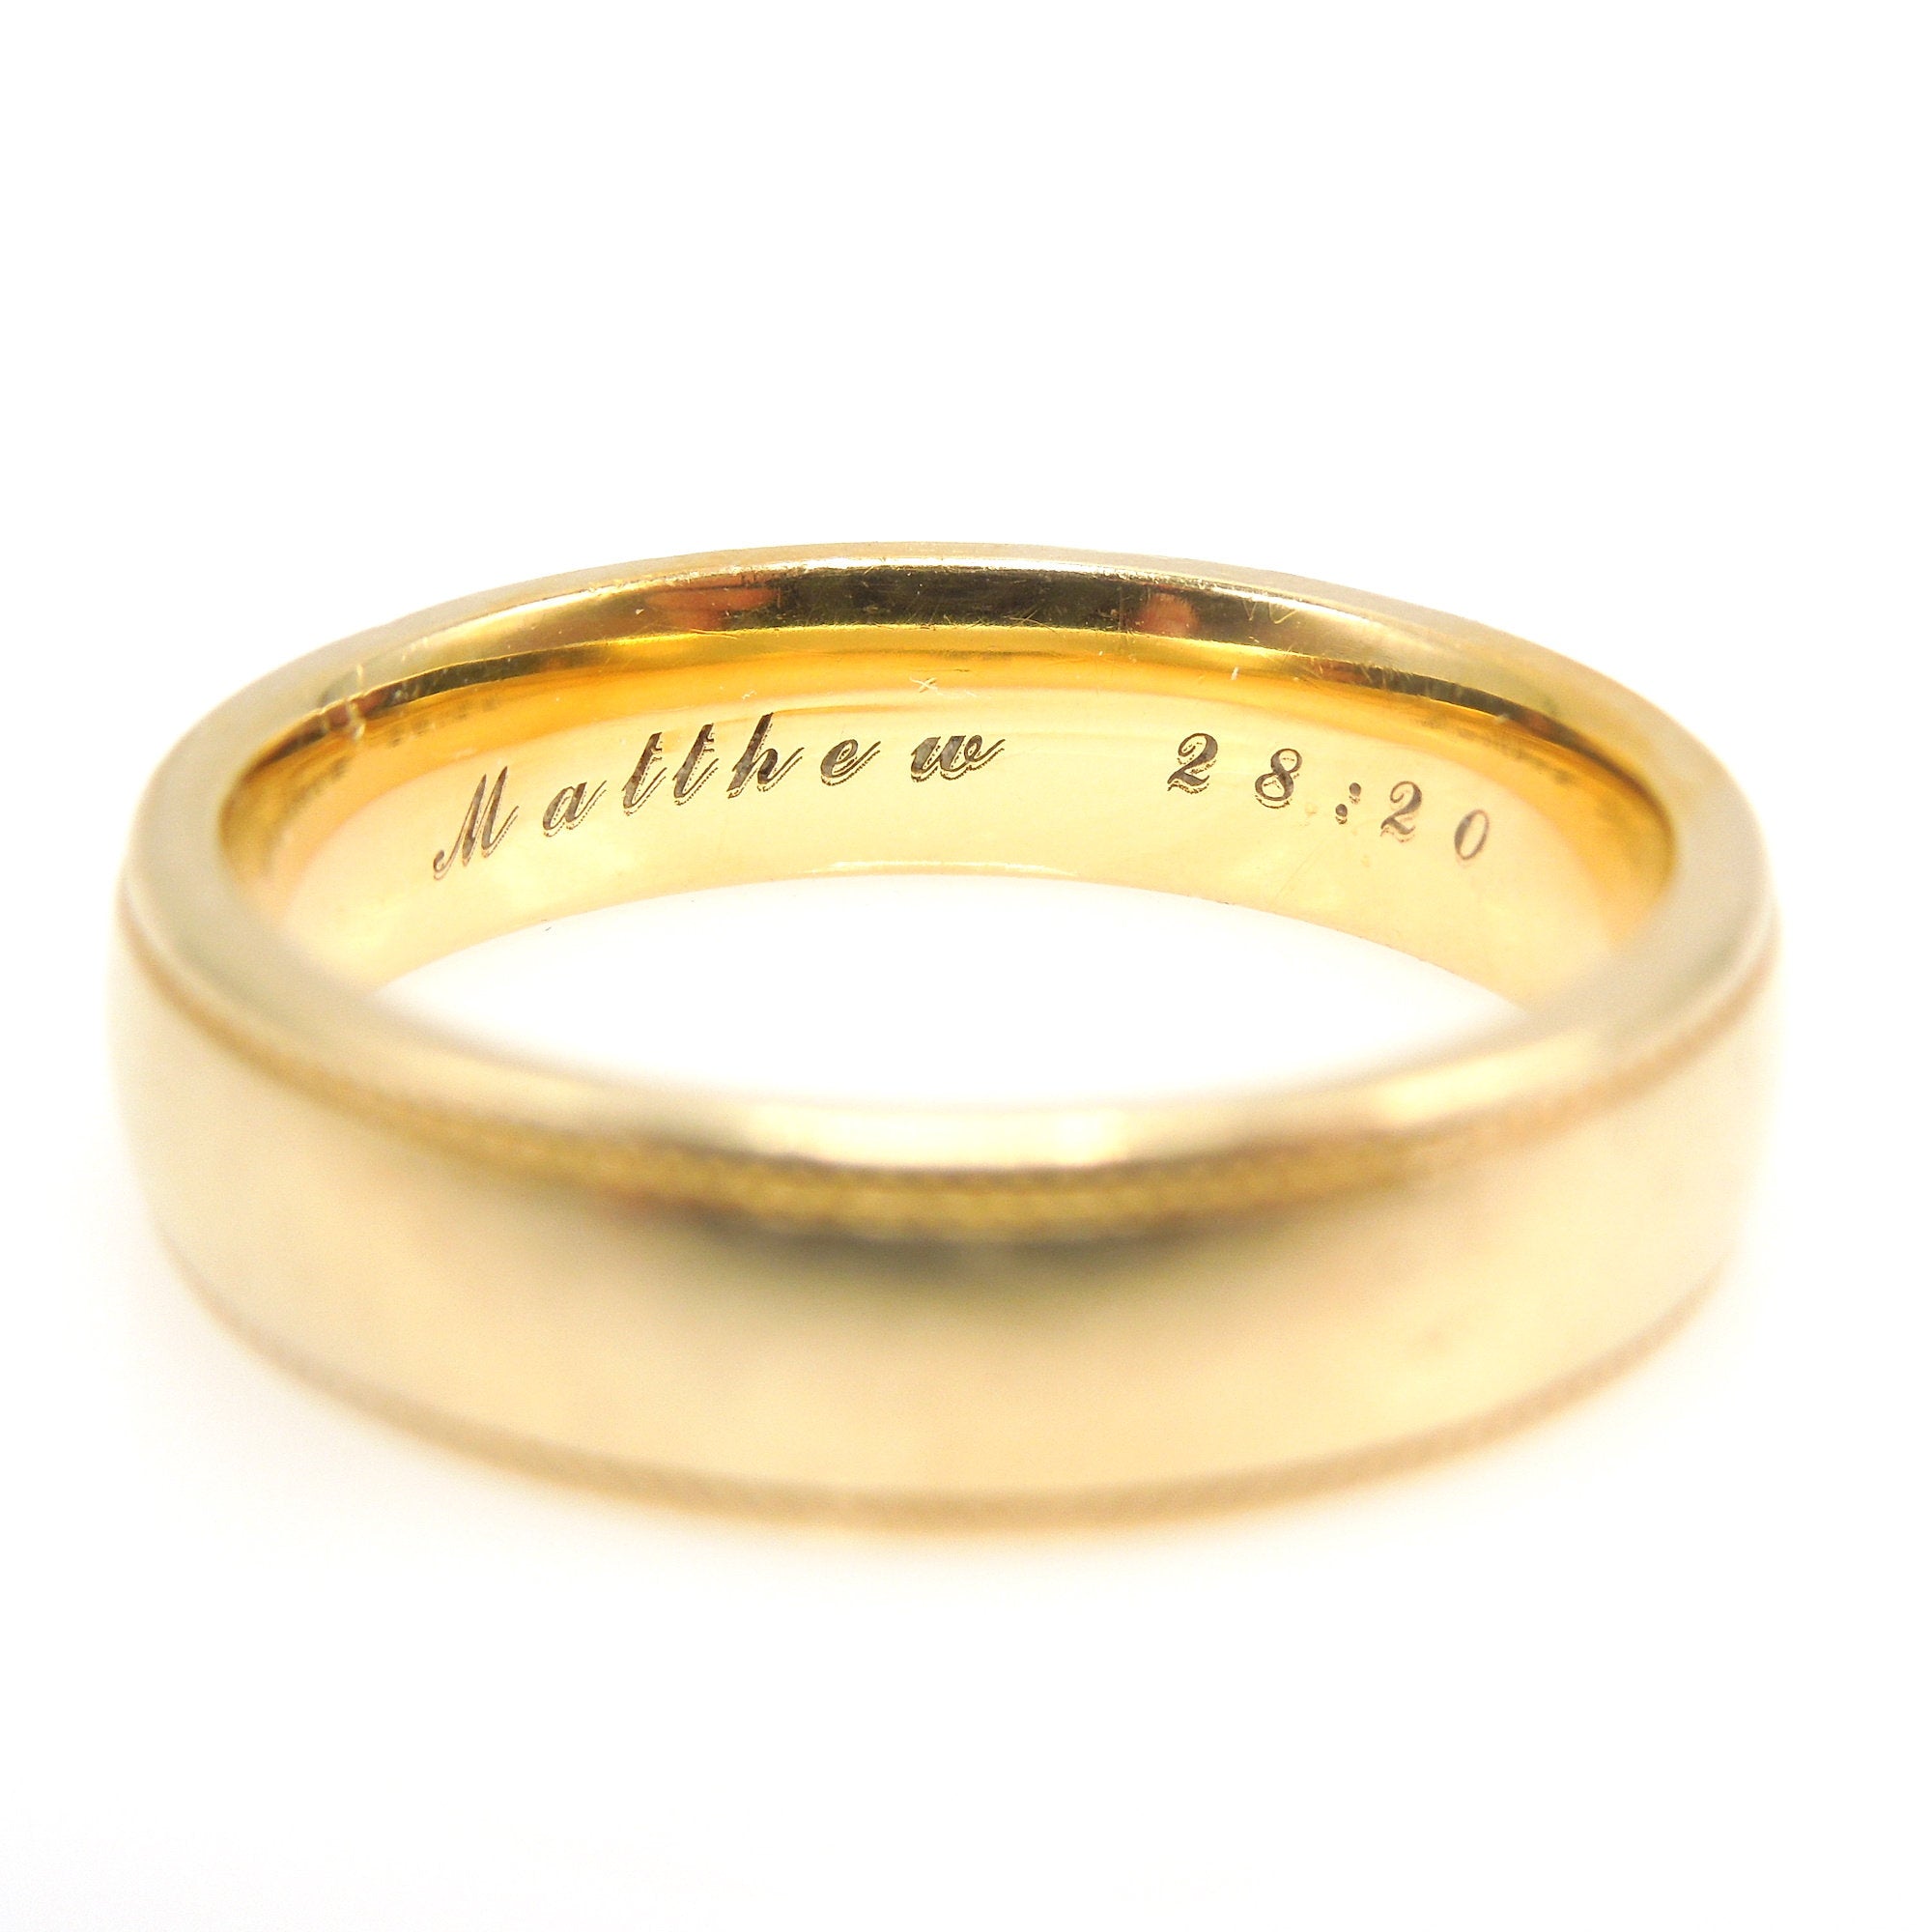 5mm Wide 18K Yellow Gold Comfort Fit Wedding Band